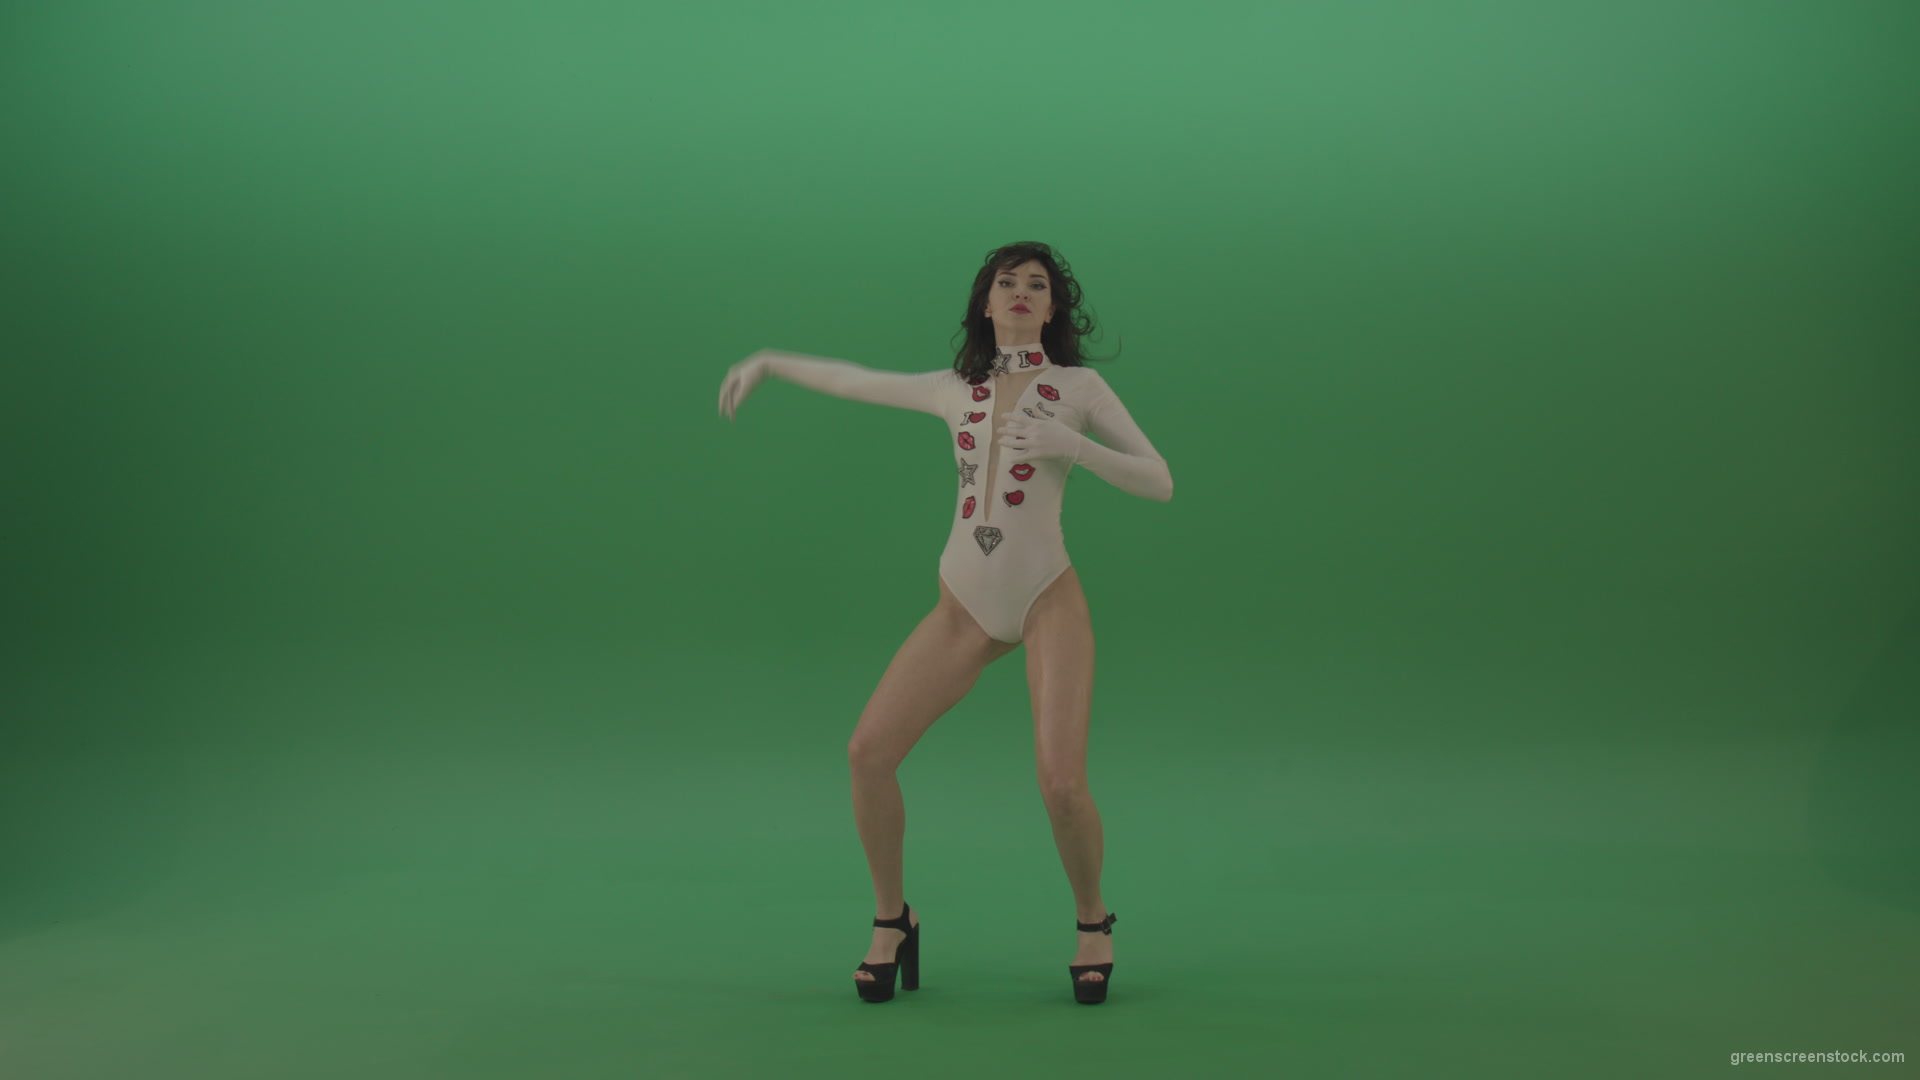 Beautiful-sexy-woman-seductively-elegantly-dancing-in-a-white-body-on-green-screen_001 Green Screen Stock